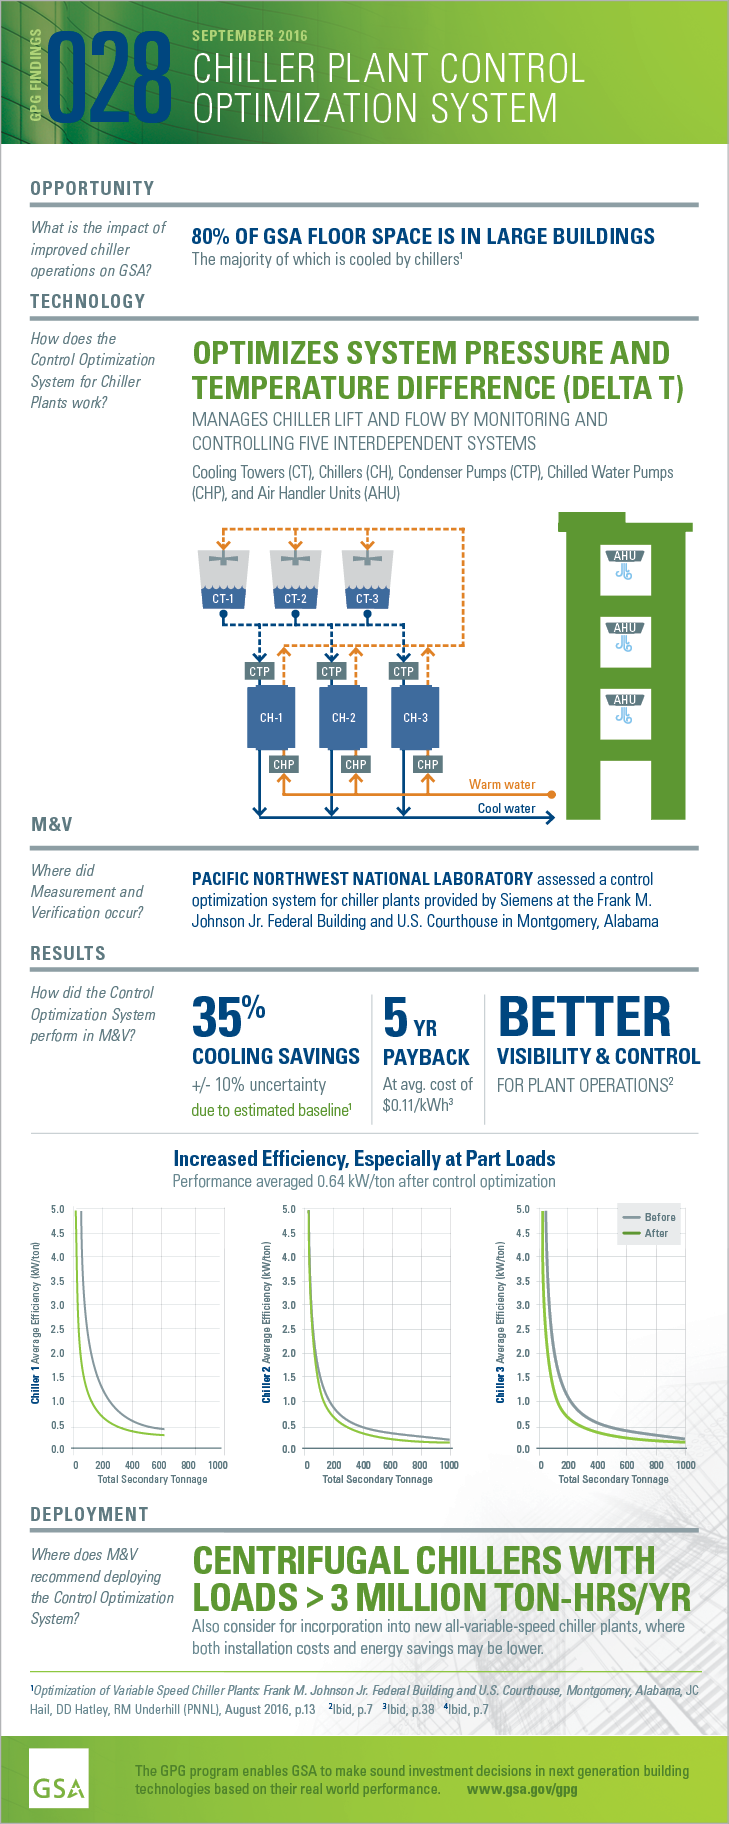 Download the PDF of the full-size infographic for GPG028 Chiller Plant Control Optimization.